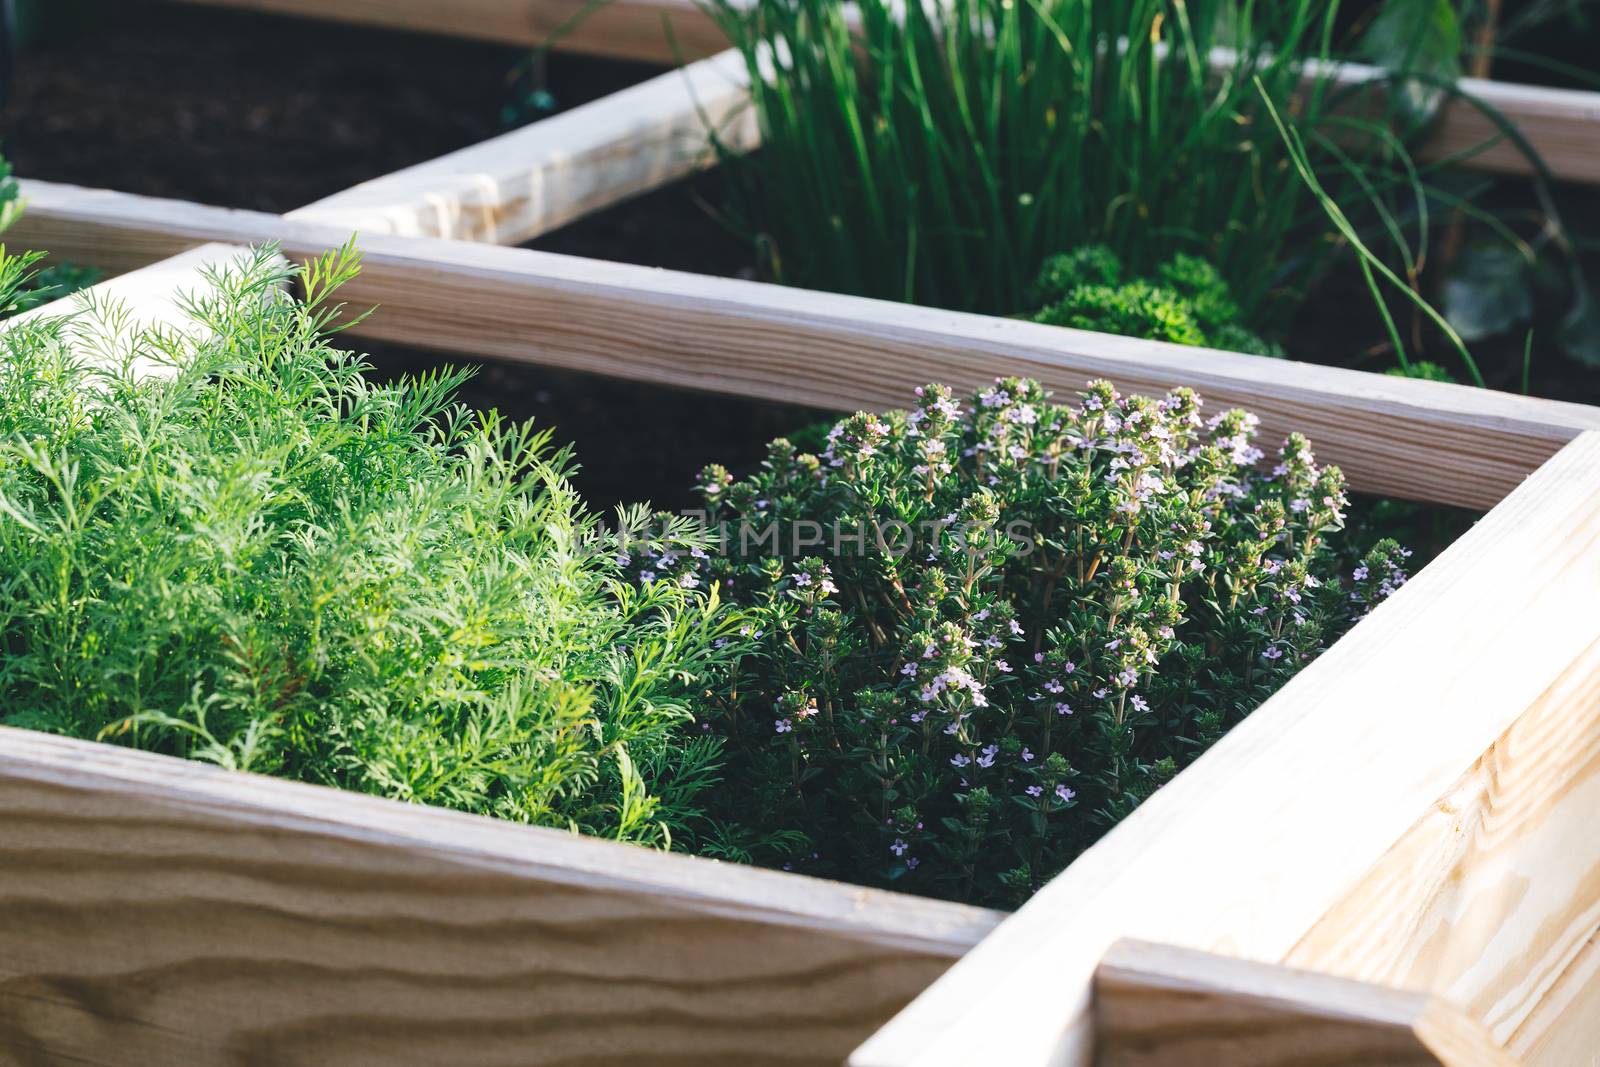 Aromatic herbs, dill, thyme, parsley and chive in a raised bed garden.